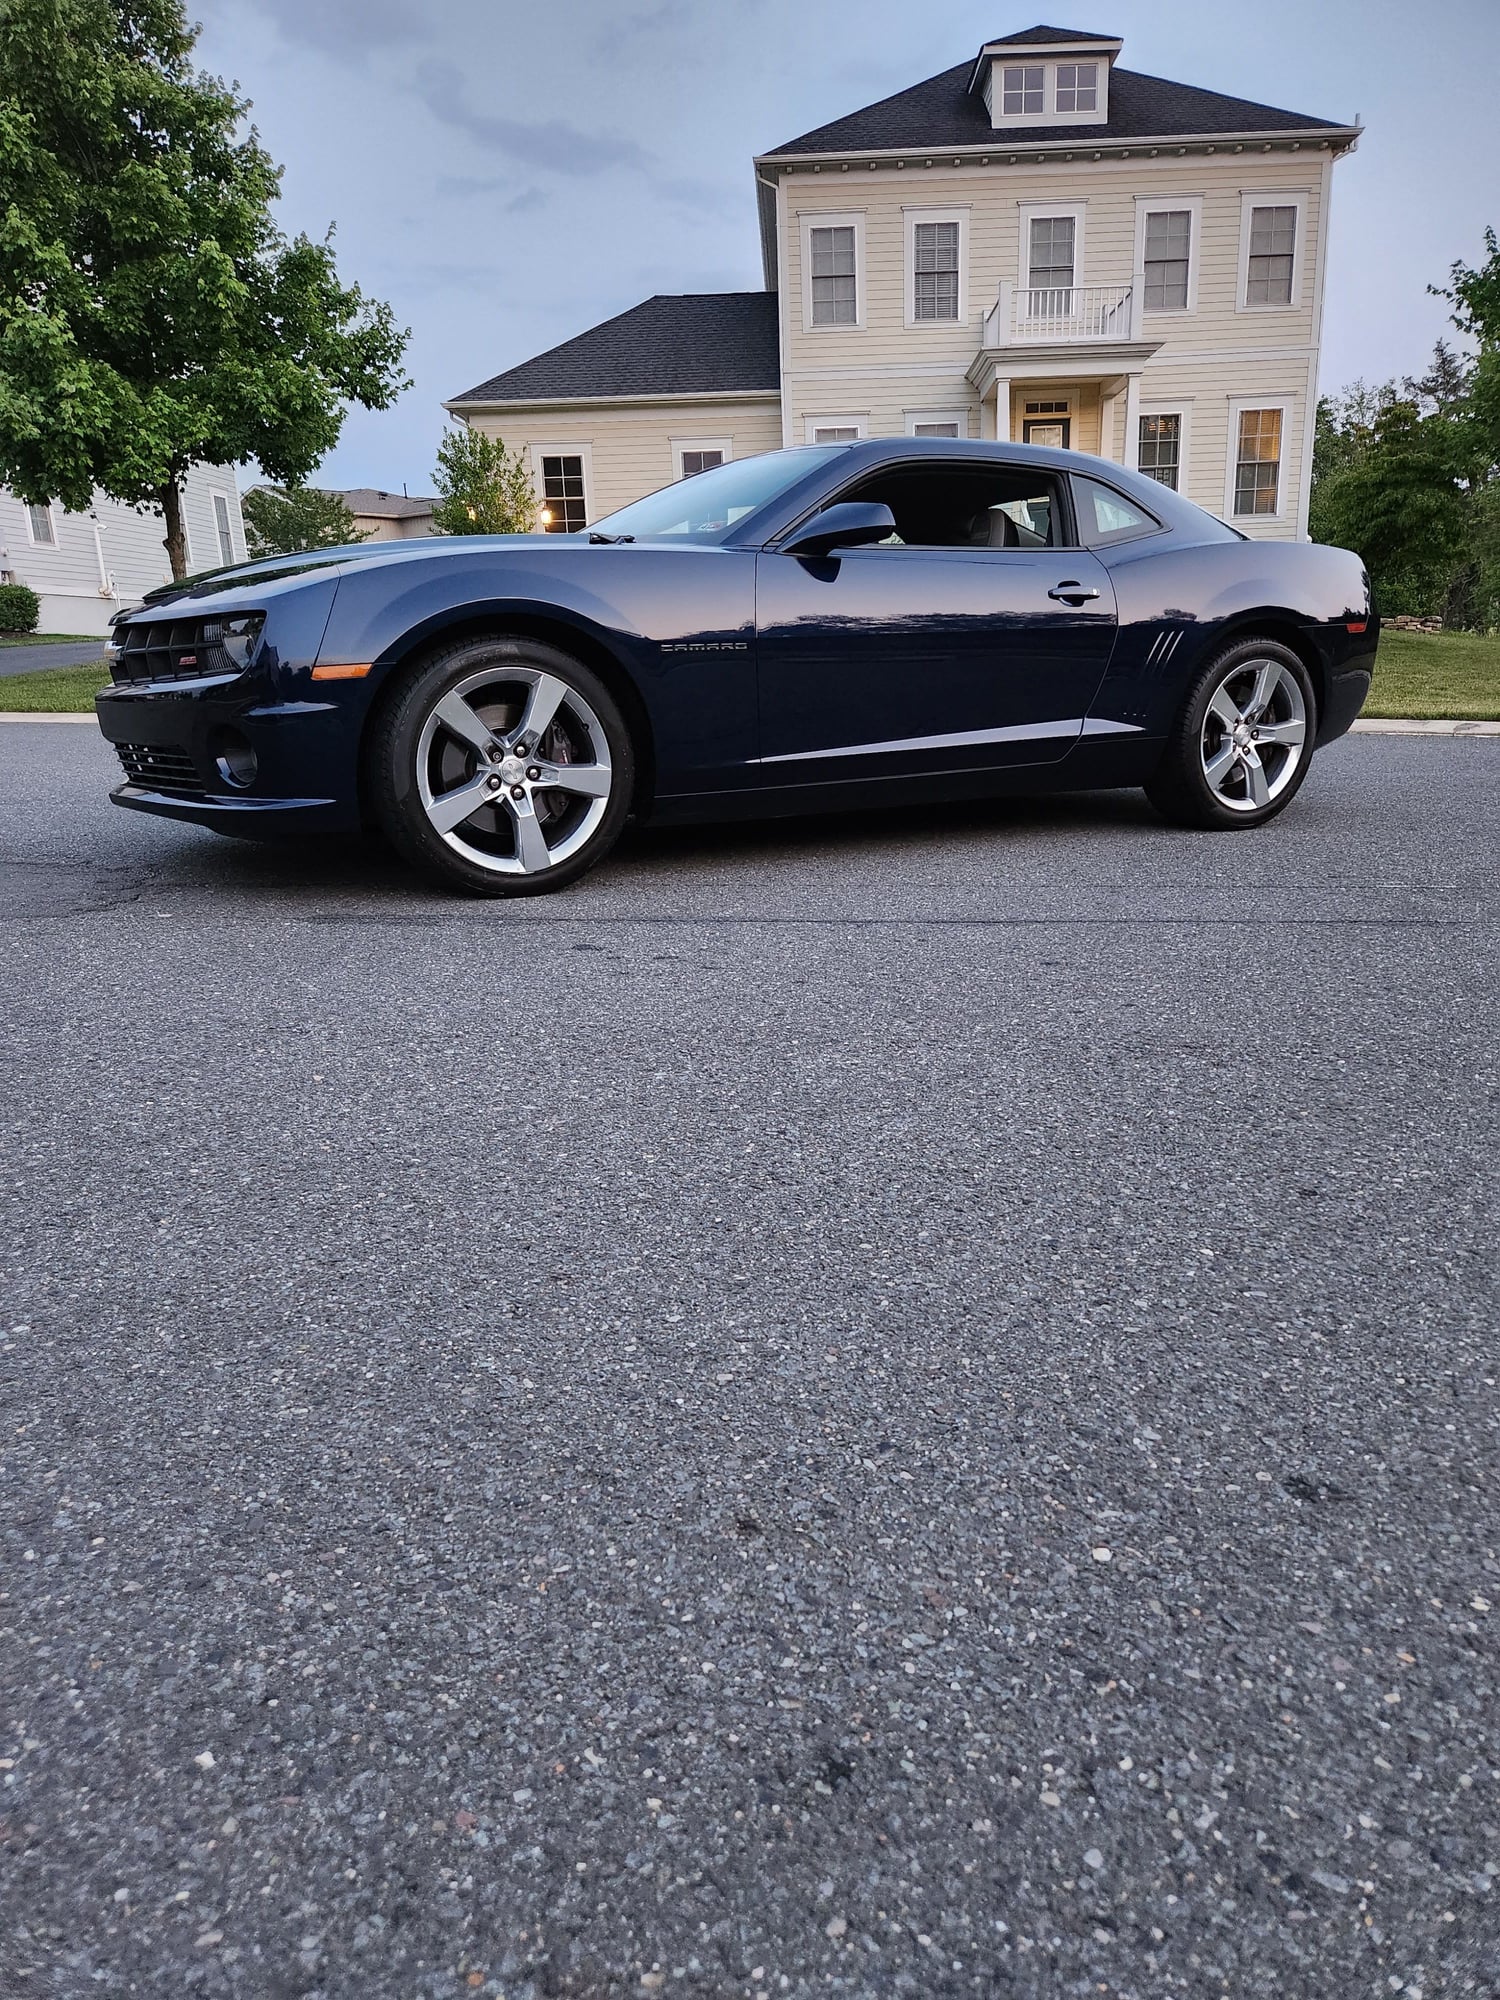 2010 Chevrolet Camaro - 2010 Camaro 2SS 6MT, 50k miles - Used - VIN 2G1FT1EW4A9203137 - 49,700 Miles - 8 cyl - 2WD - Manual - Coupe - Blue - Ashburn, VA 20148, United States